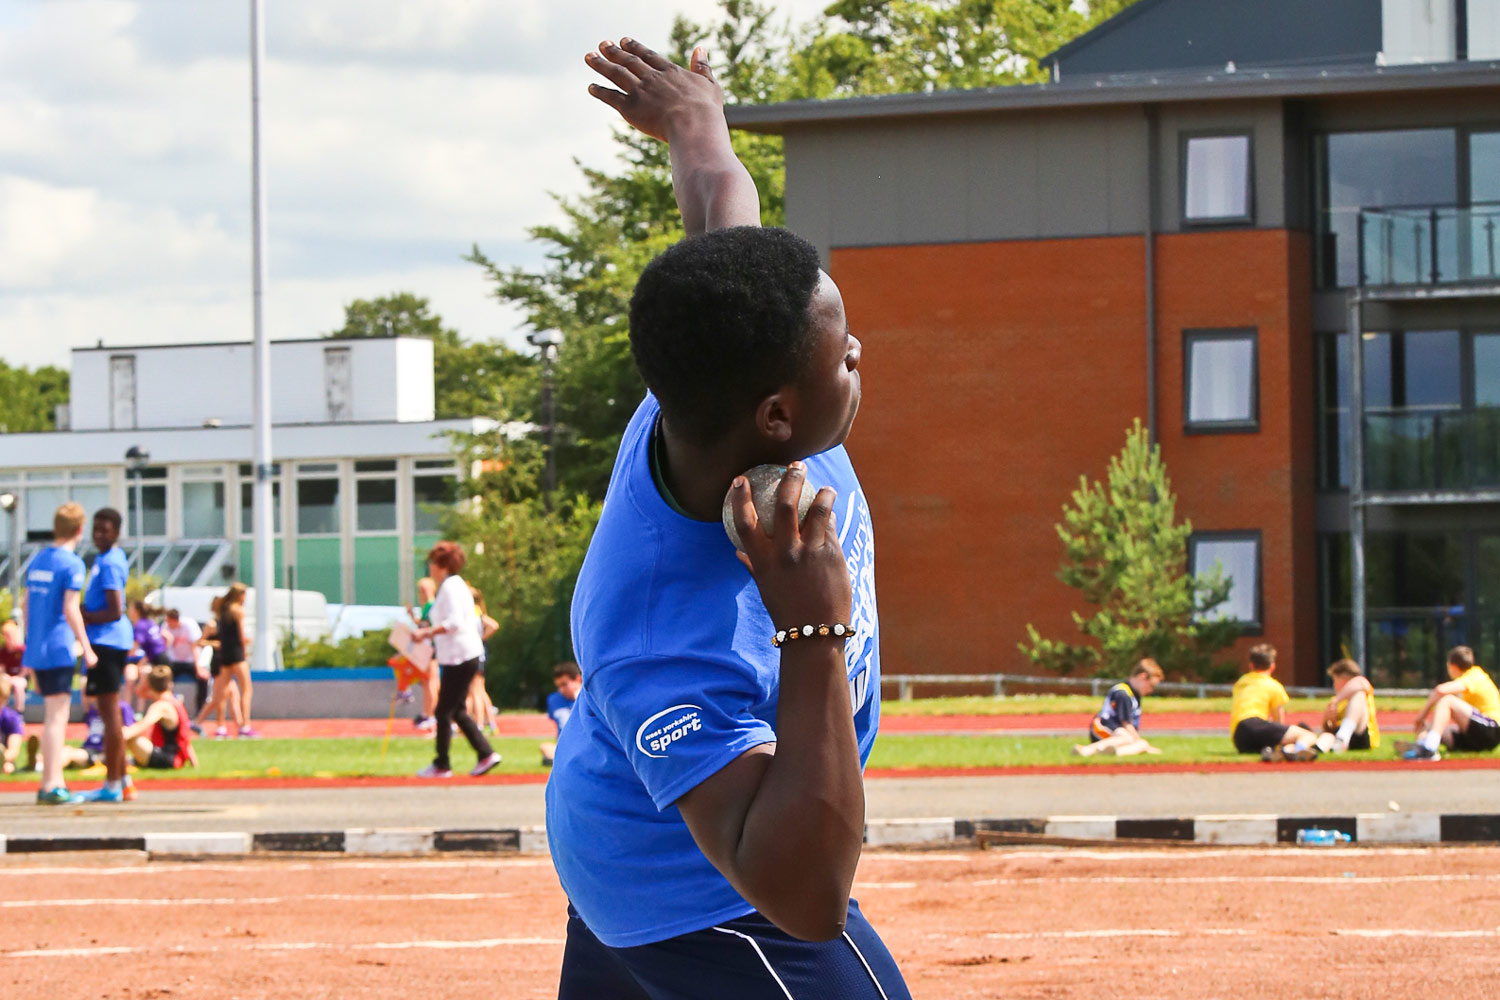   The School Games    Find out more  